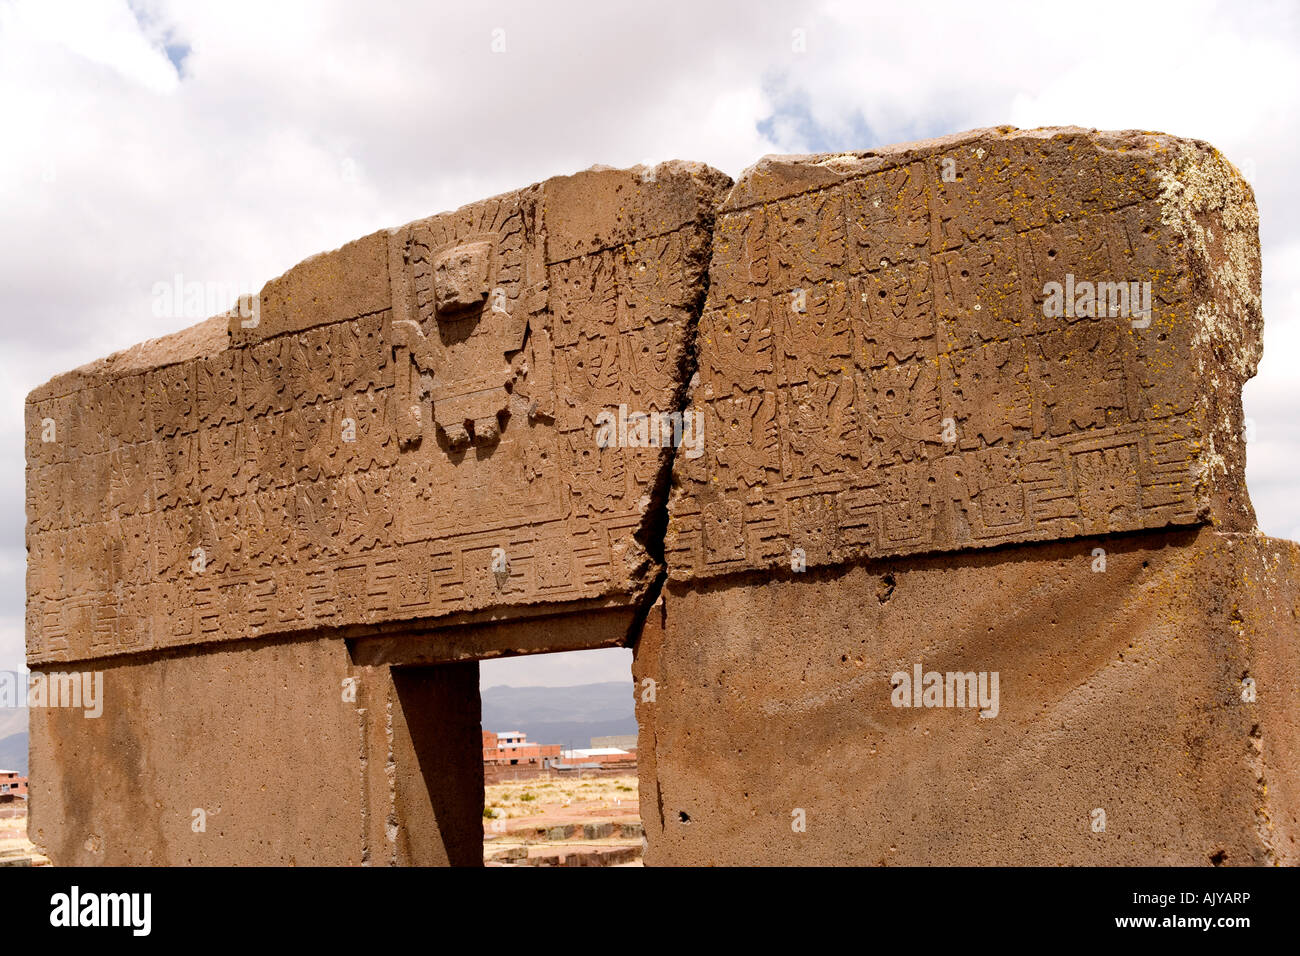 Puerta del Sol, the Gateway of the Sun in the Kalasasaya, the walled temple, at the archaeological site at Tiwanaku,Bolivia Stock Photo